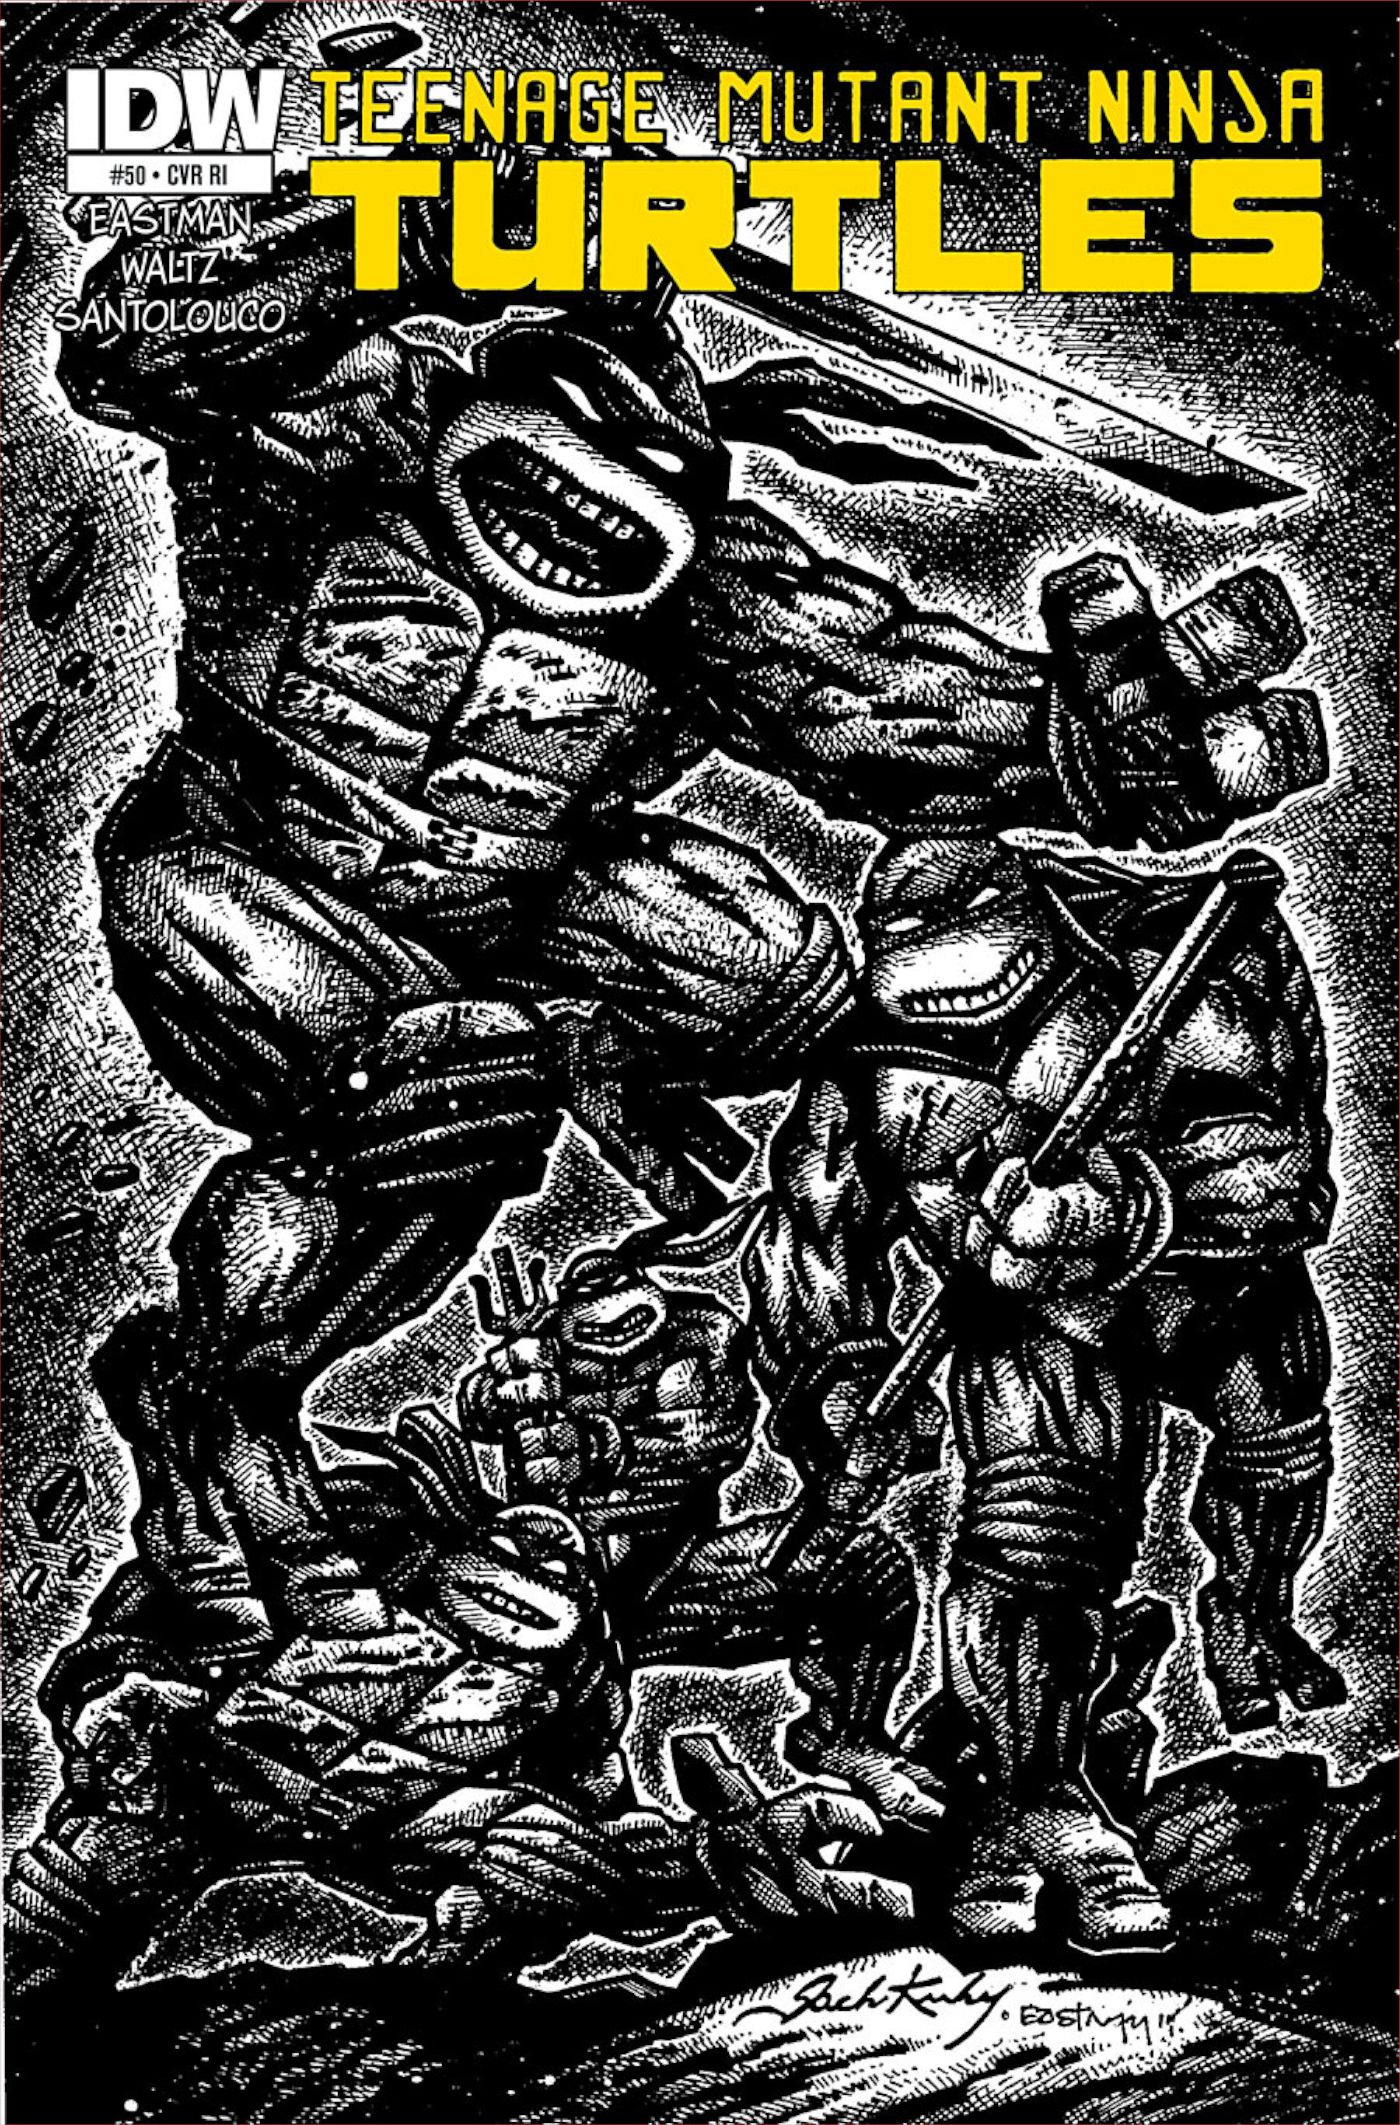 TMNT by Jack Kirby and Kevin Eastman